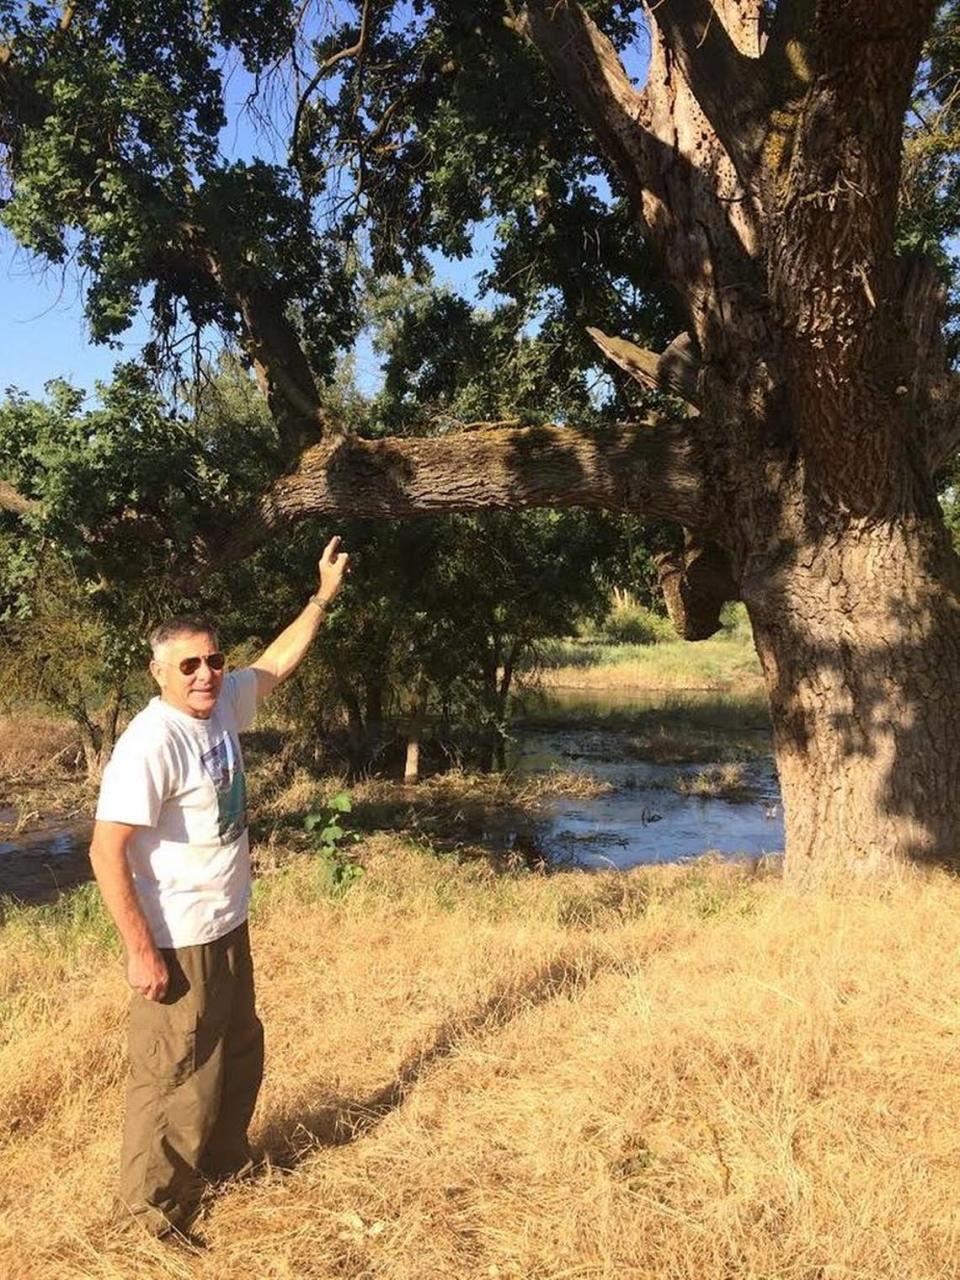 Richard Sloan, founder of RiverTree Volunteers, points toward the branches of an oak tree where he and a couple friends built a three-story treehouse during the summer of 1964. The tree is located at Sycamore Island Park, one of the few areas with managed public access along the San Joaquin River near Fresno.